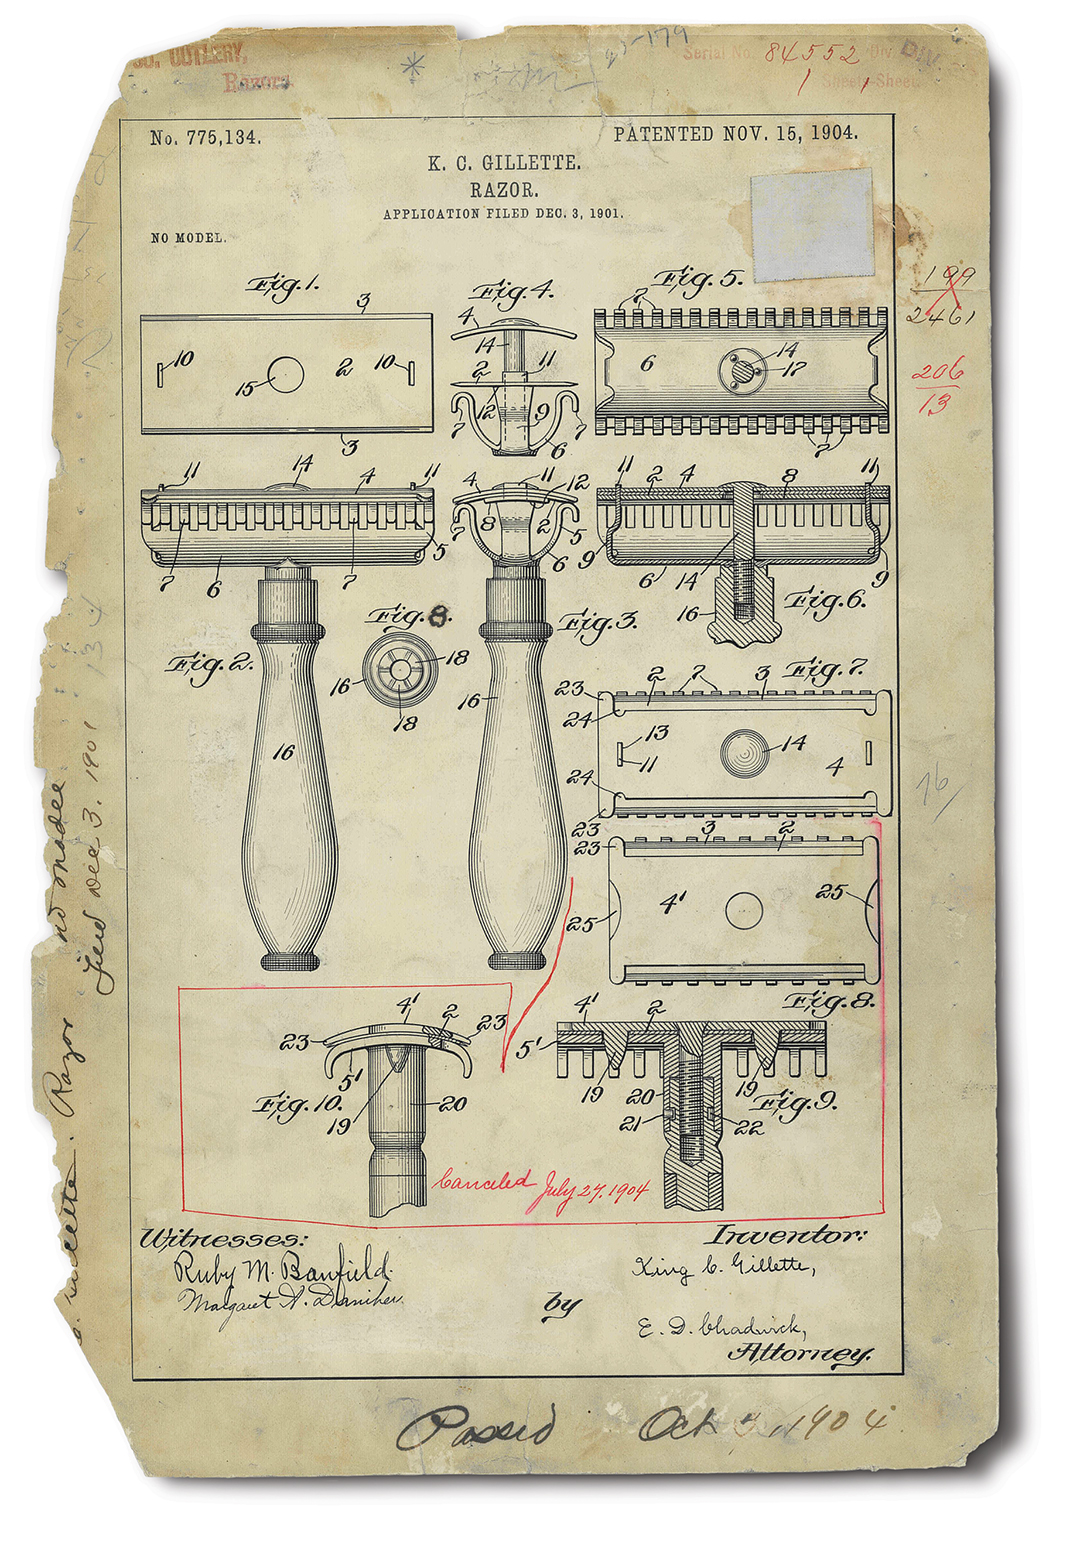 Photo of a patent drawing for a Gillette razor.